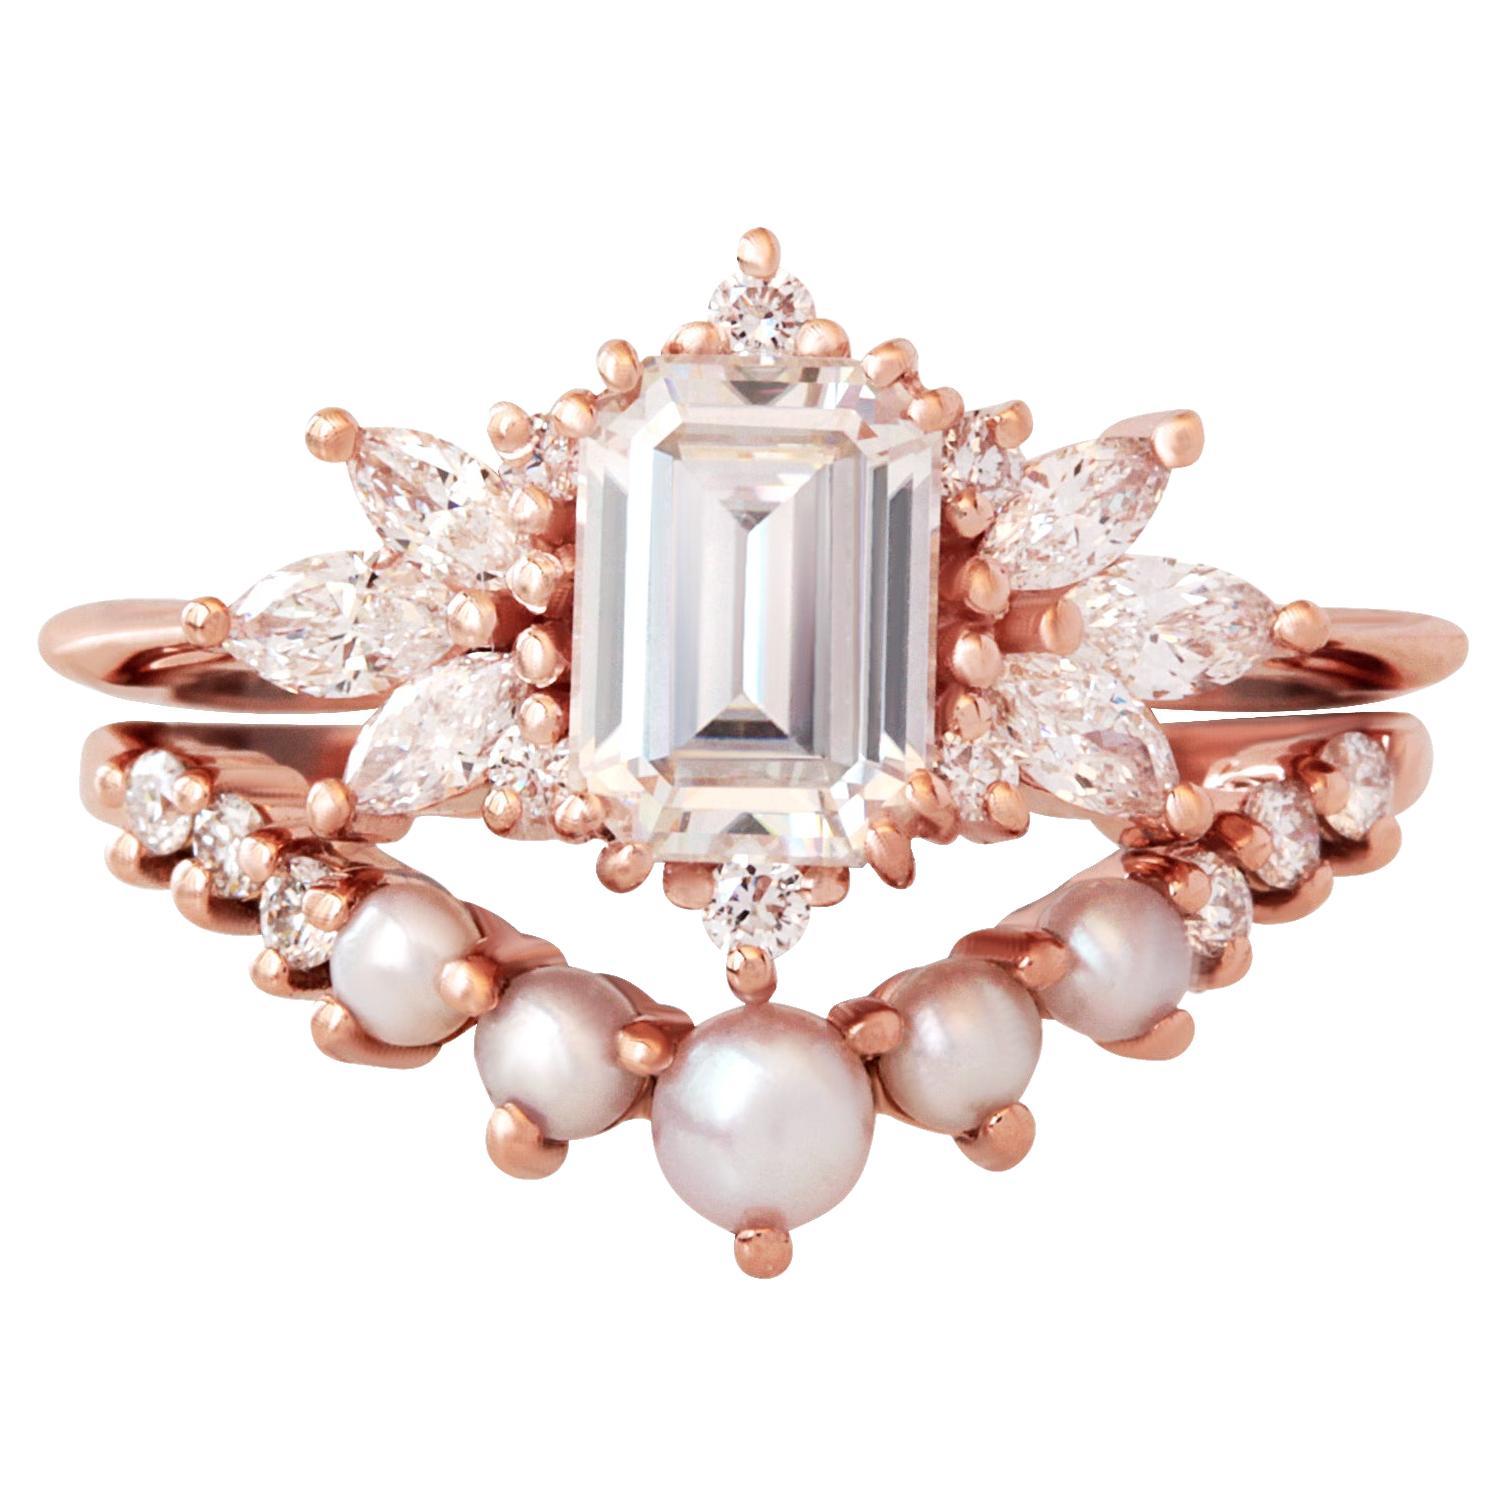 Emerald Cut Moissanite Engagement Two Ring Set Spark & Pearls Nesting Ring 